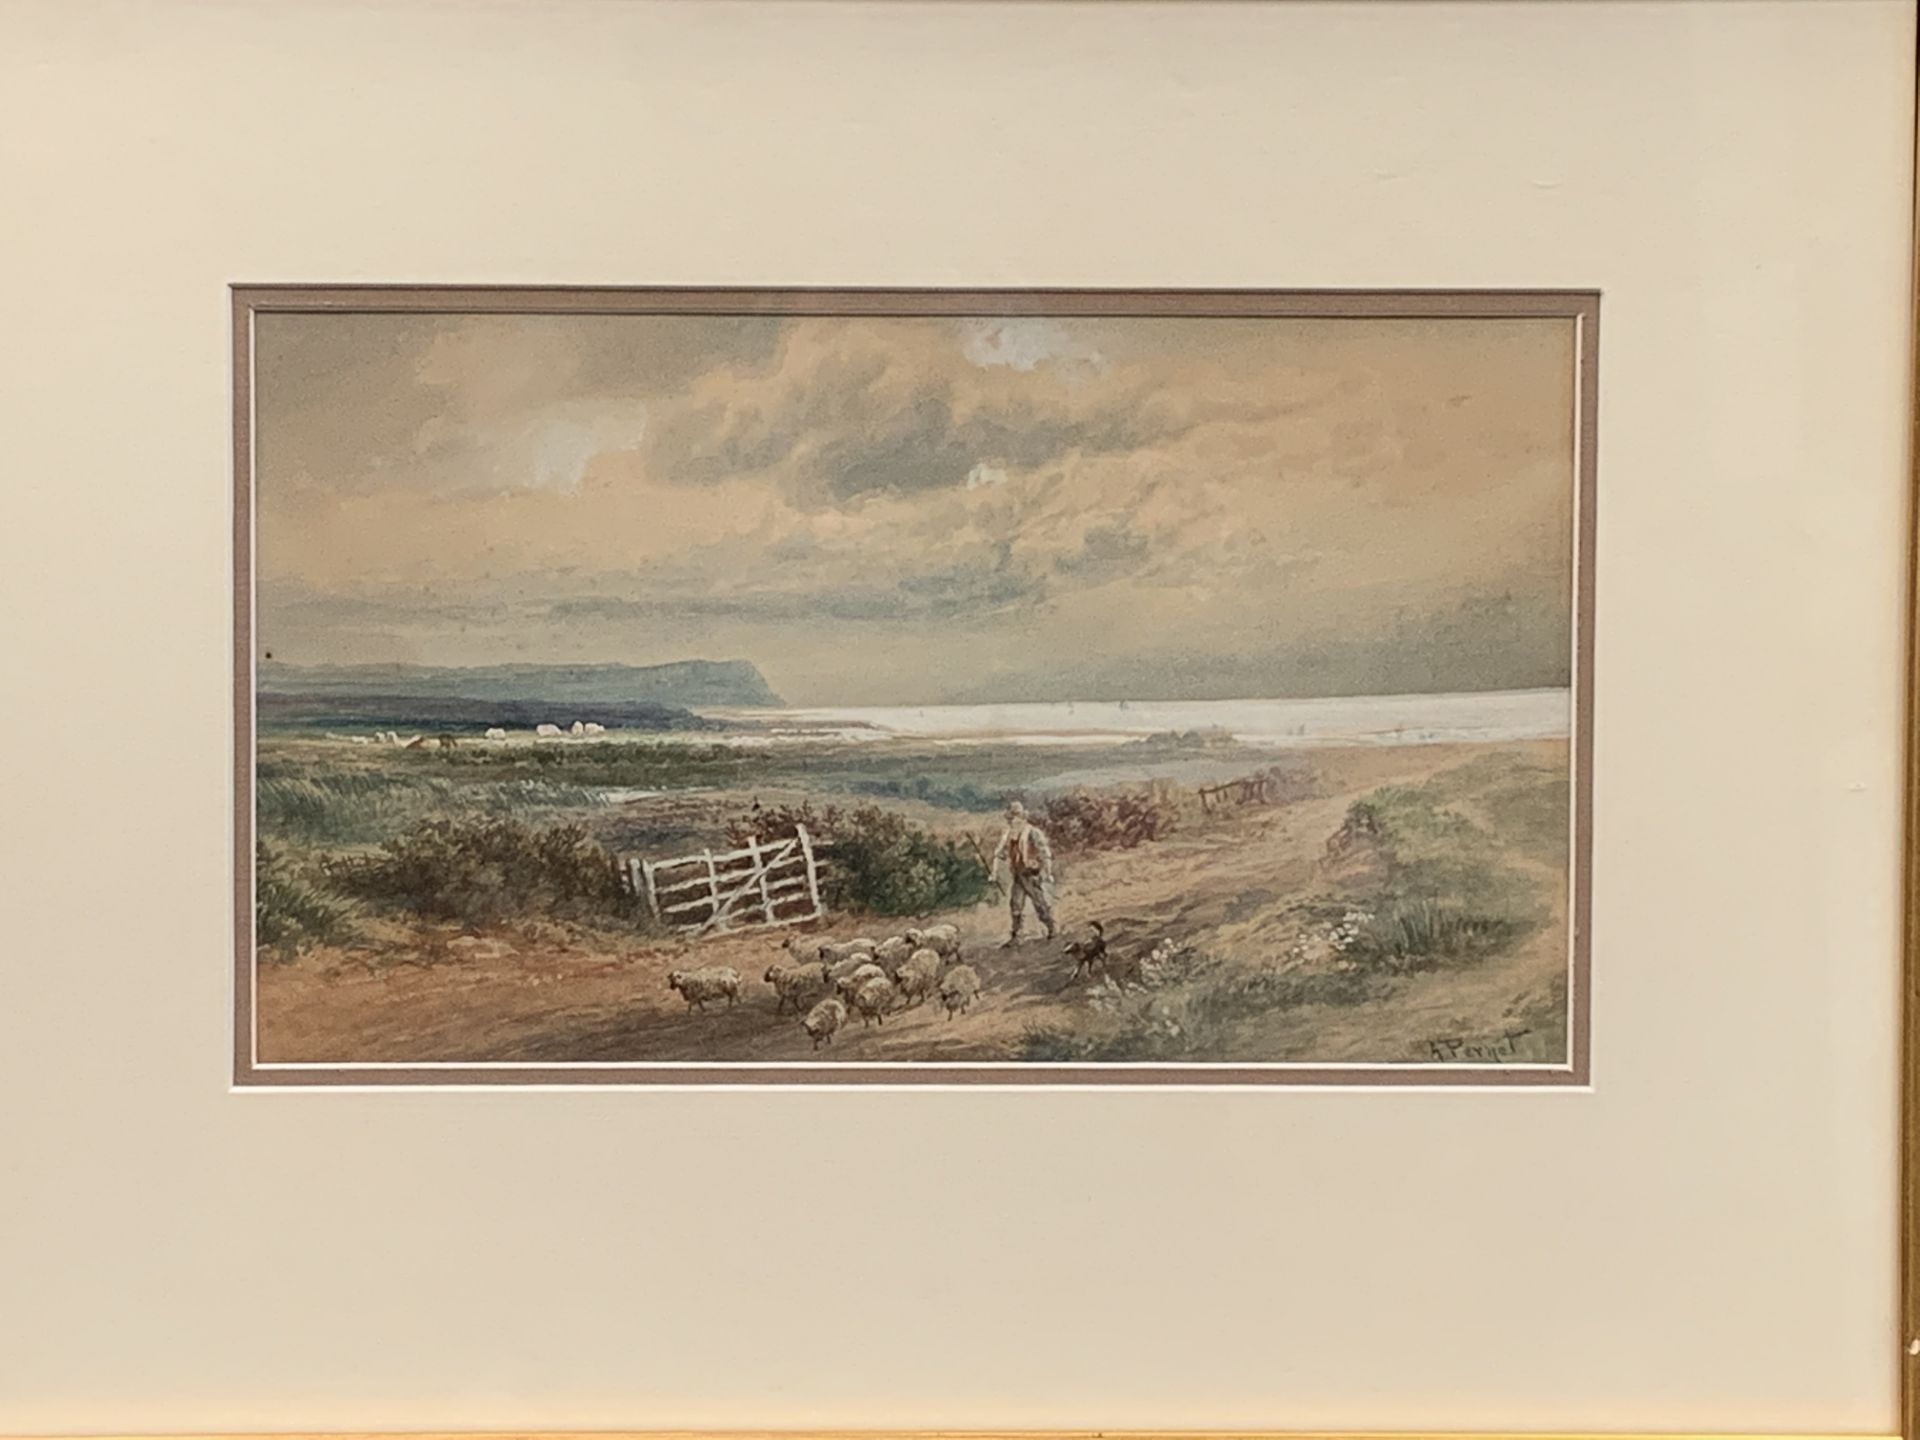 A. Pergot - framed and glazed watercolour - Image 2 of 5